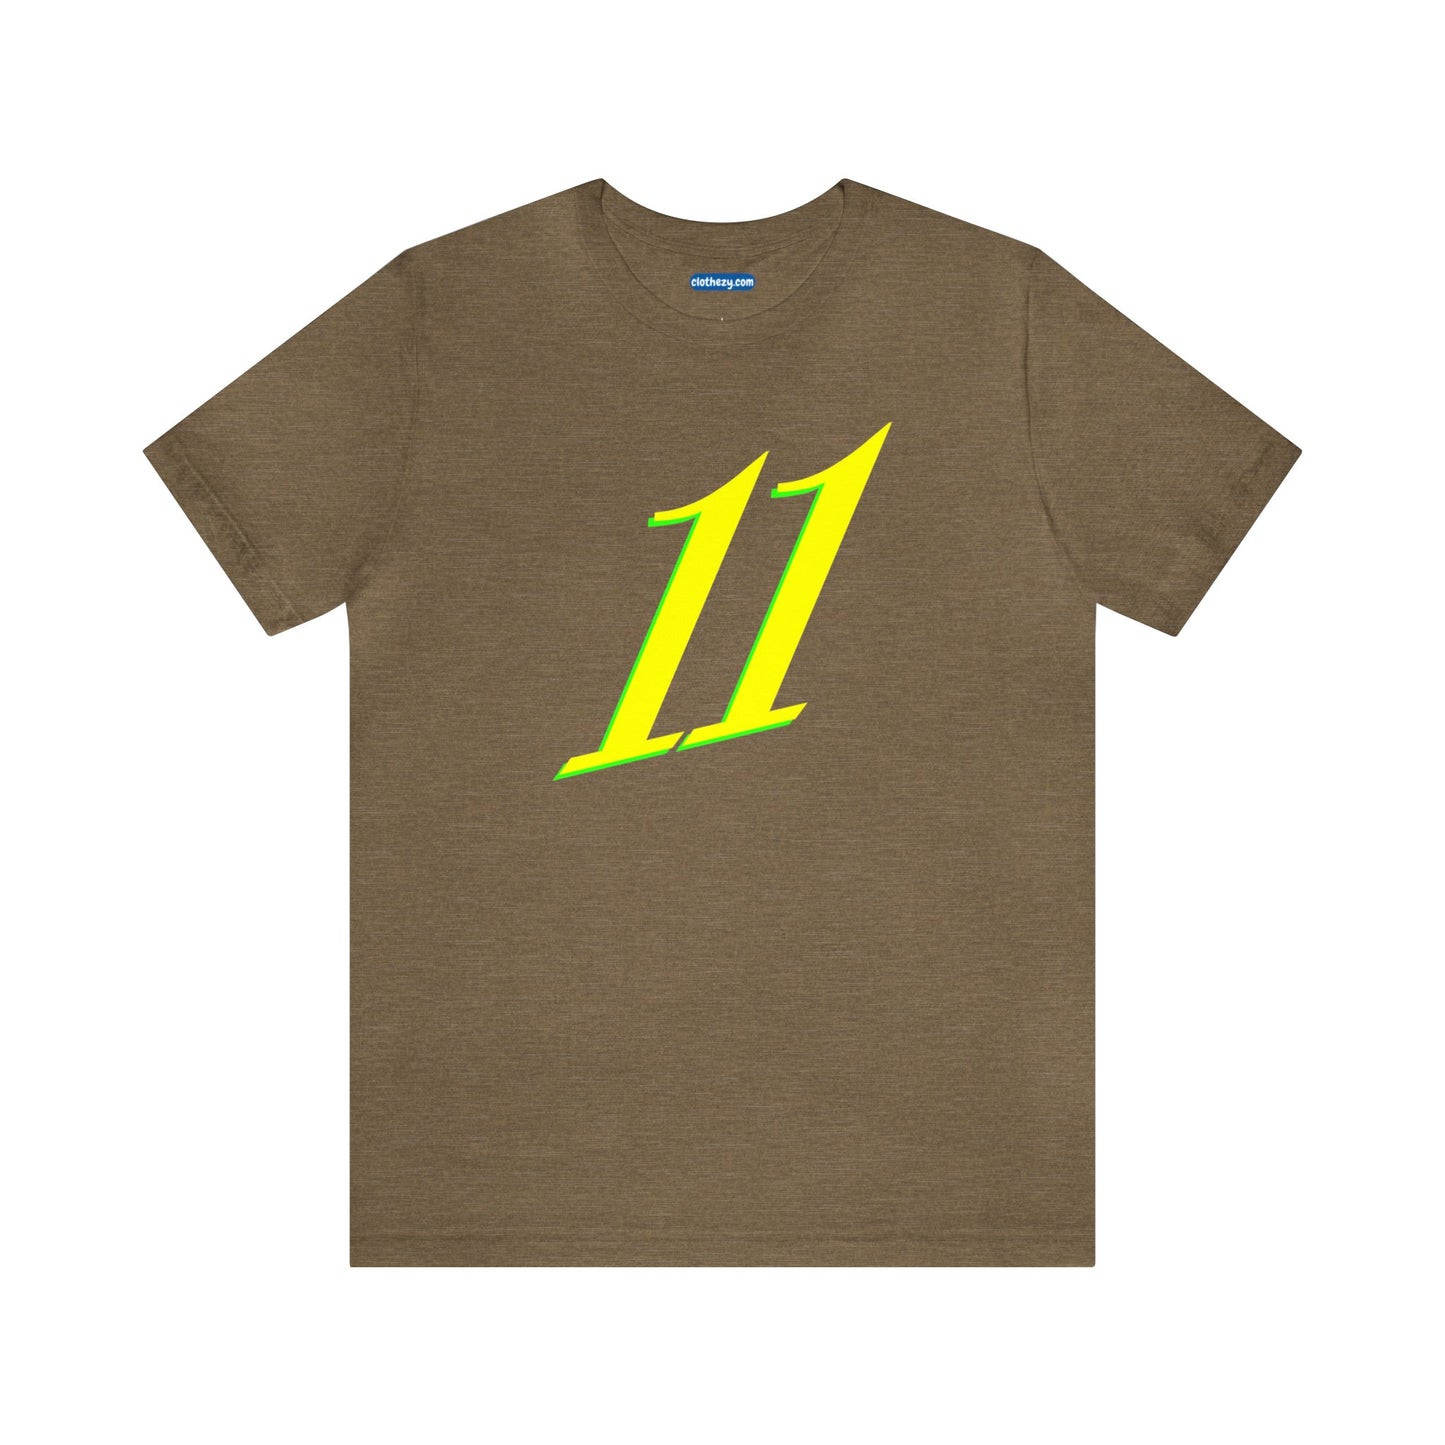 Number 11 Design - Soft Cotton Tee for birthdays and celebrations, Gift for friends and family, Multiple Options by clothezy.com in Olive Heather Size Small - Buy Now